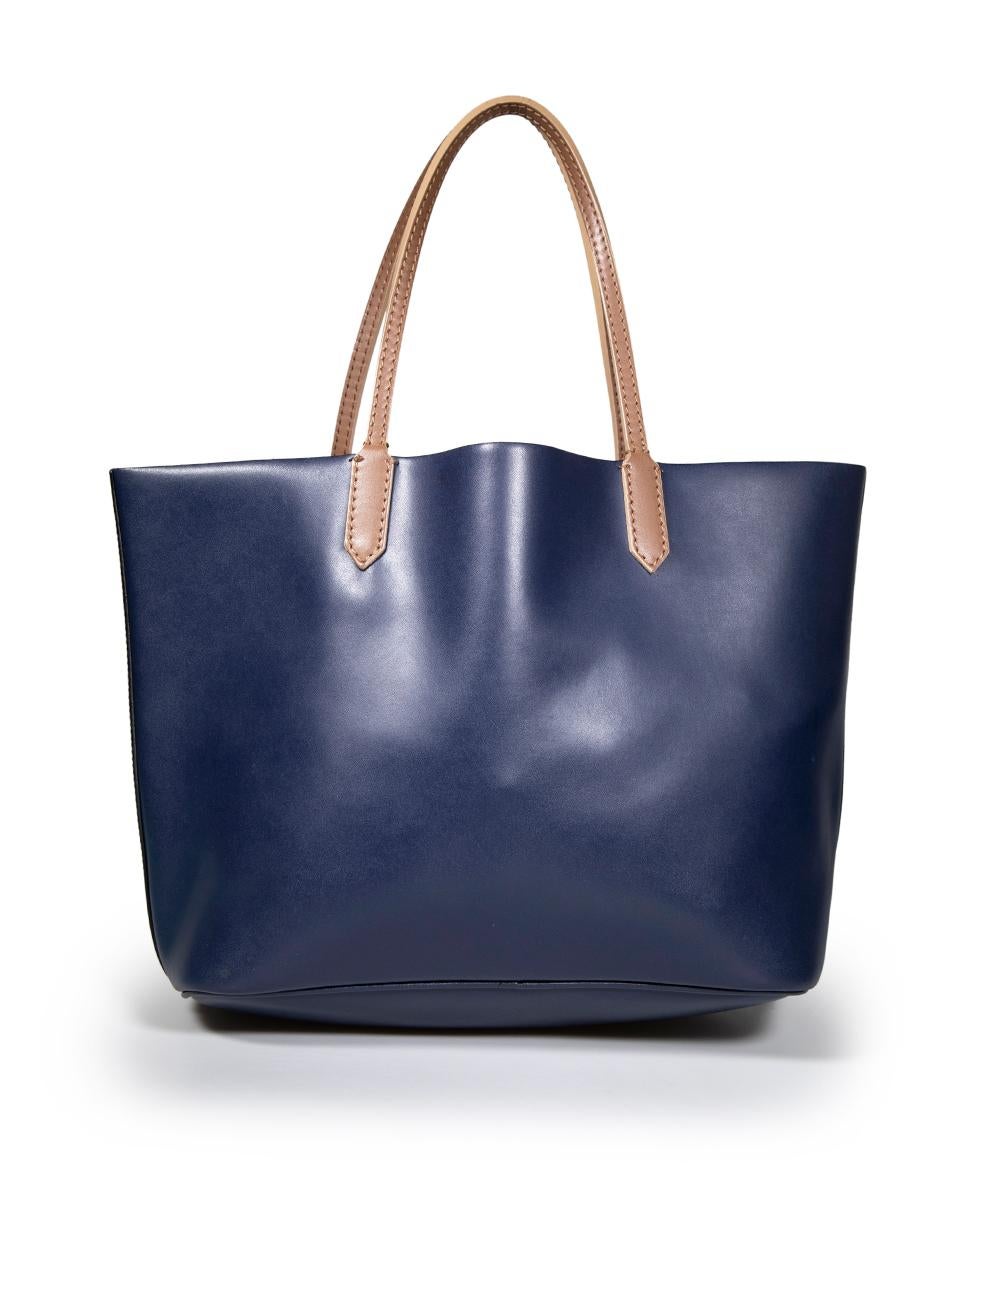 Givenchy Navy Leather GV Shopper Tote In Good Condition For Sale In London, GB